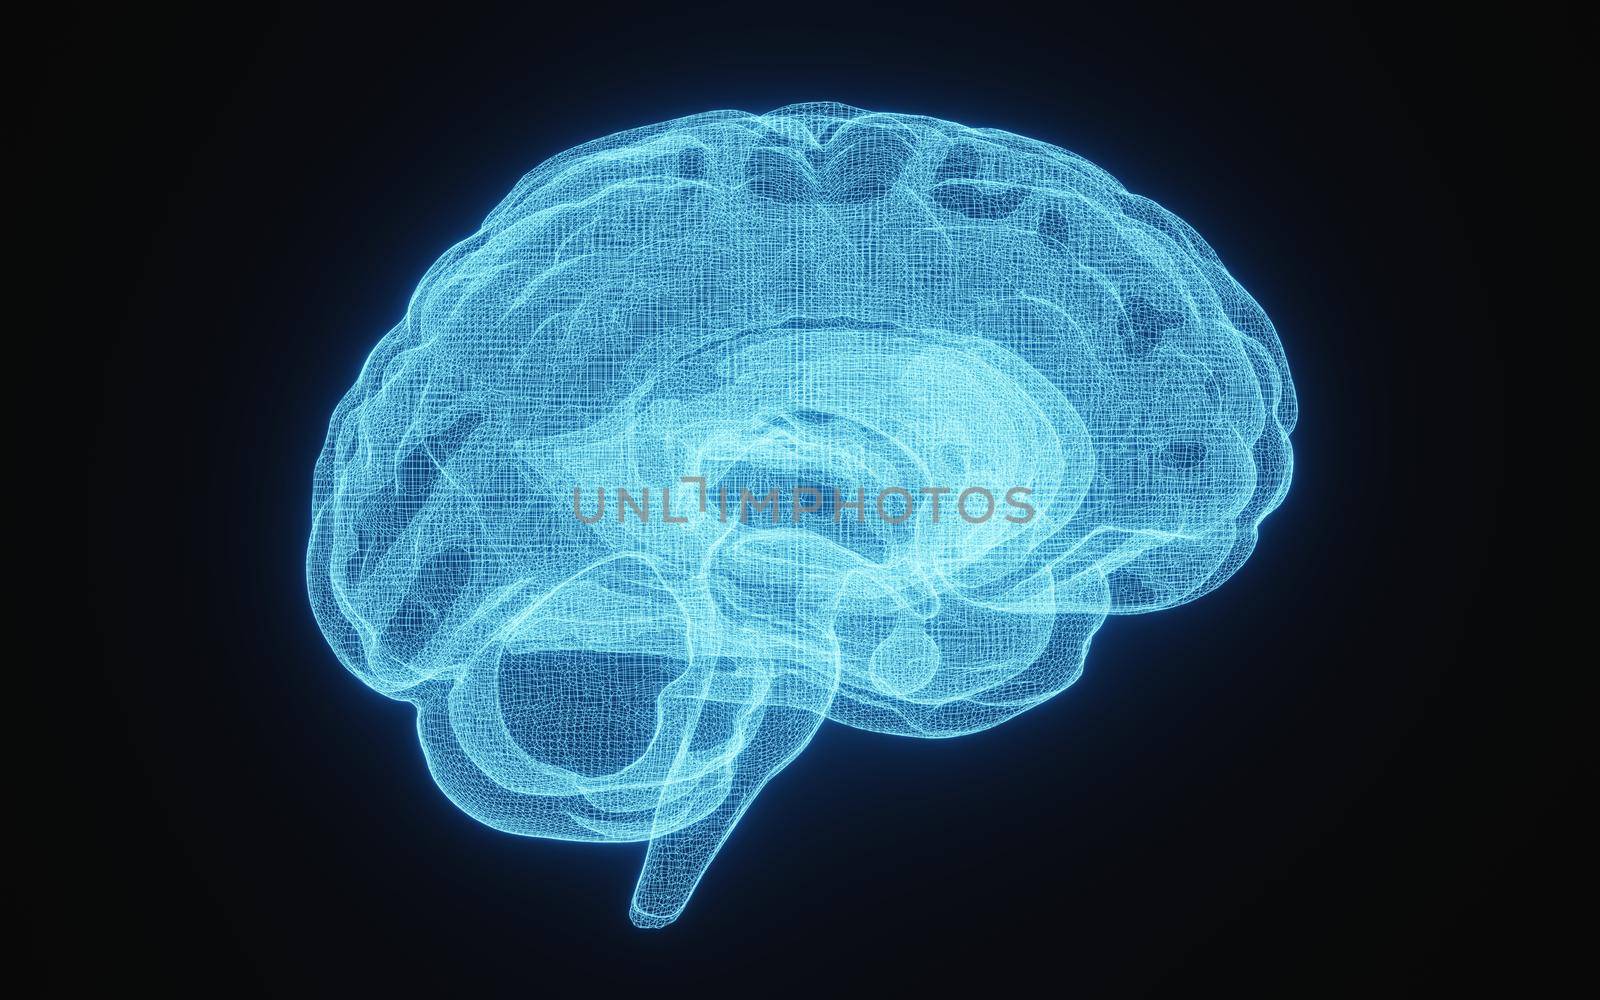 Glowing X-ray image of human brain in blue wireframe on isolated black background. Science and medical concept. Side of brain. 3D illustration rendering by MiniStocker